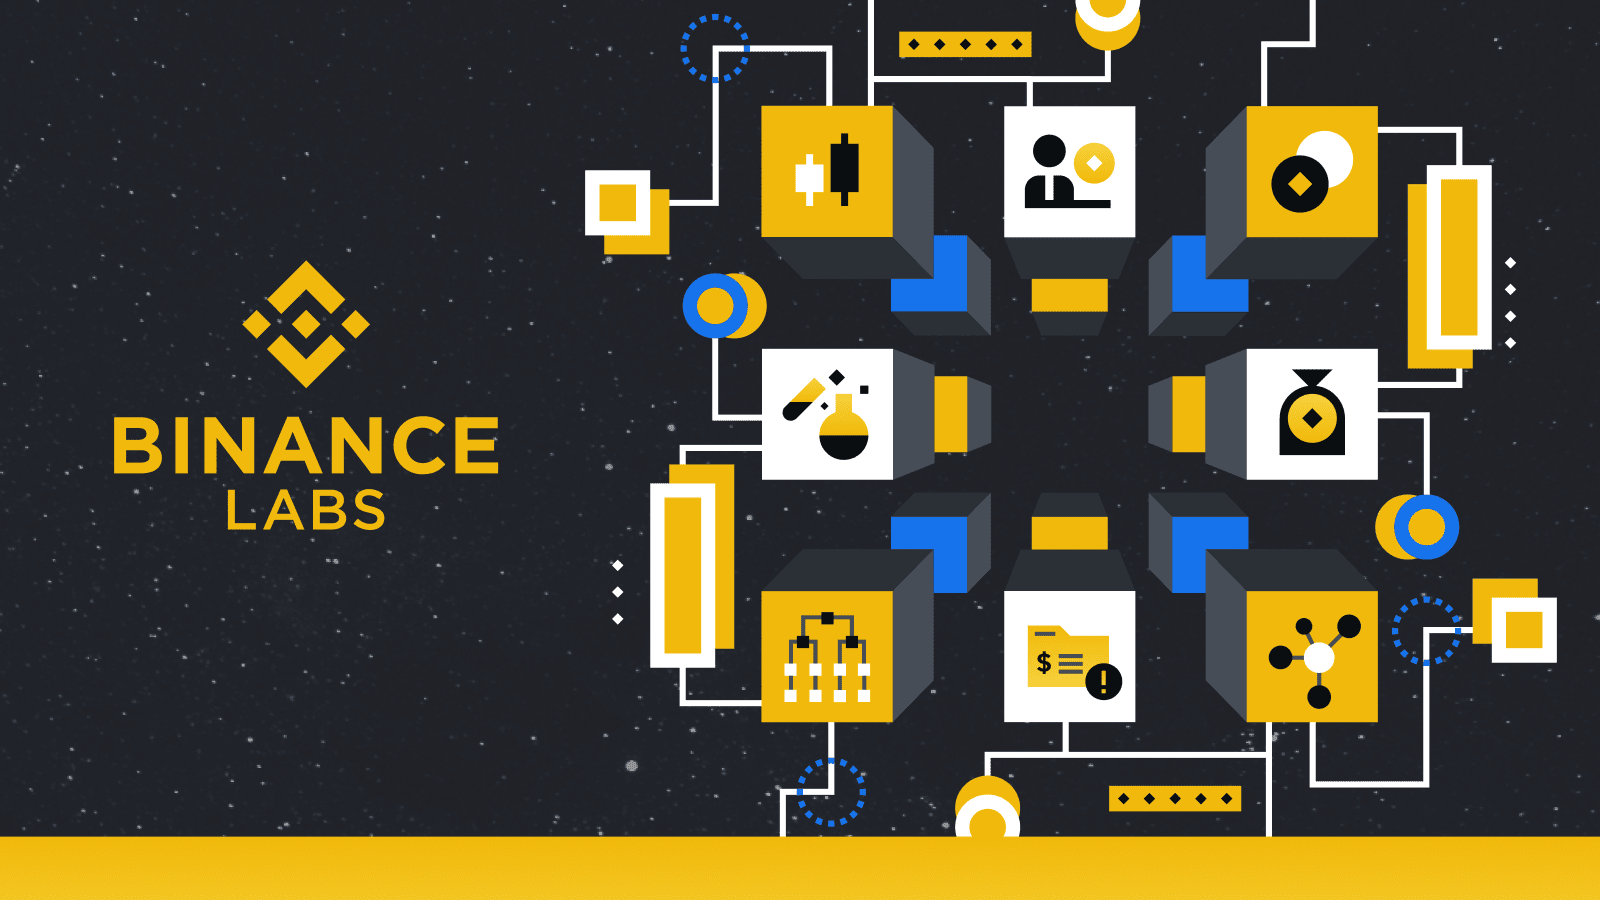 Binance Labs makes investments through three different stages: incubation, early-stage ventures, and late-stage growth